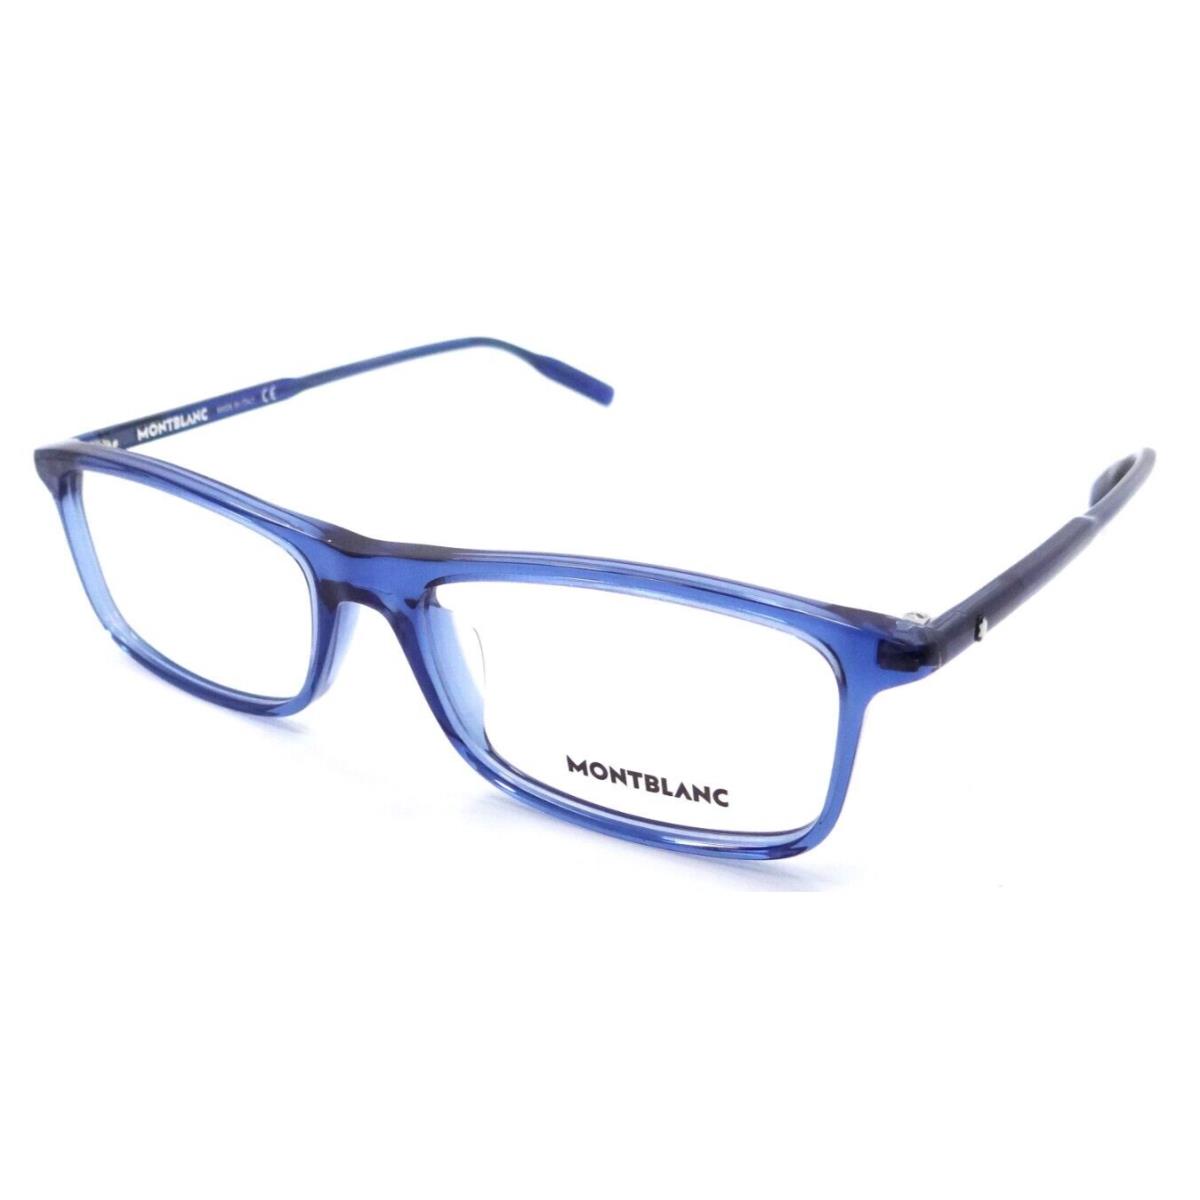 Montblanc Eyeglasses Frames MB0086OA 004 54-17-150 Blue / Blue Made in Italy